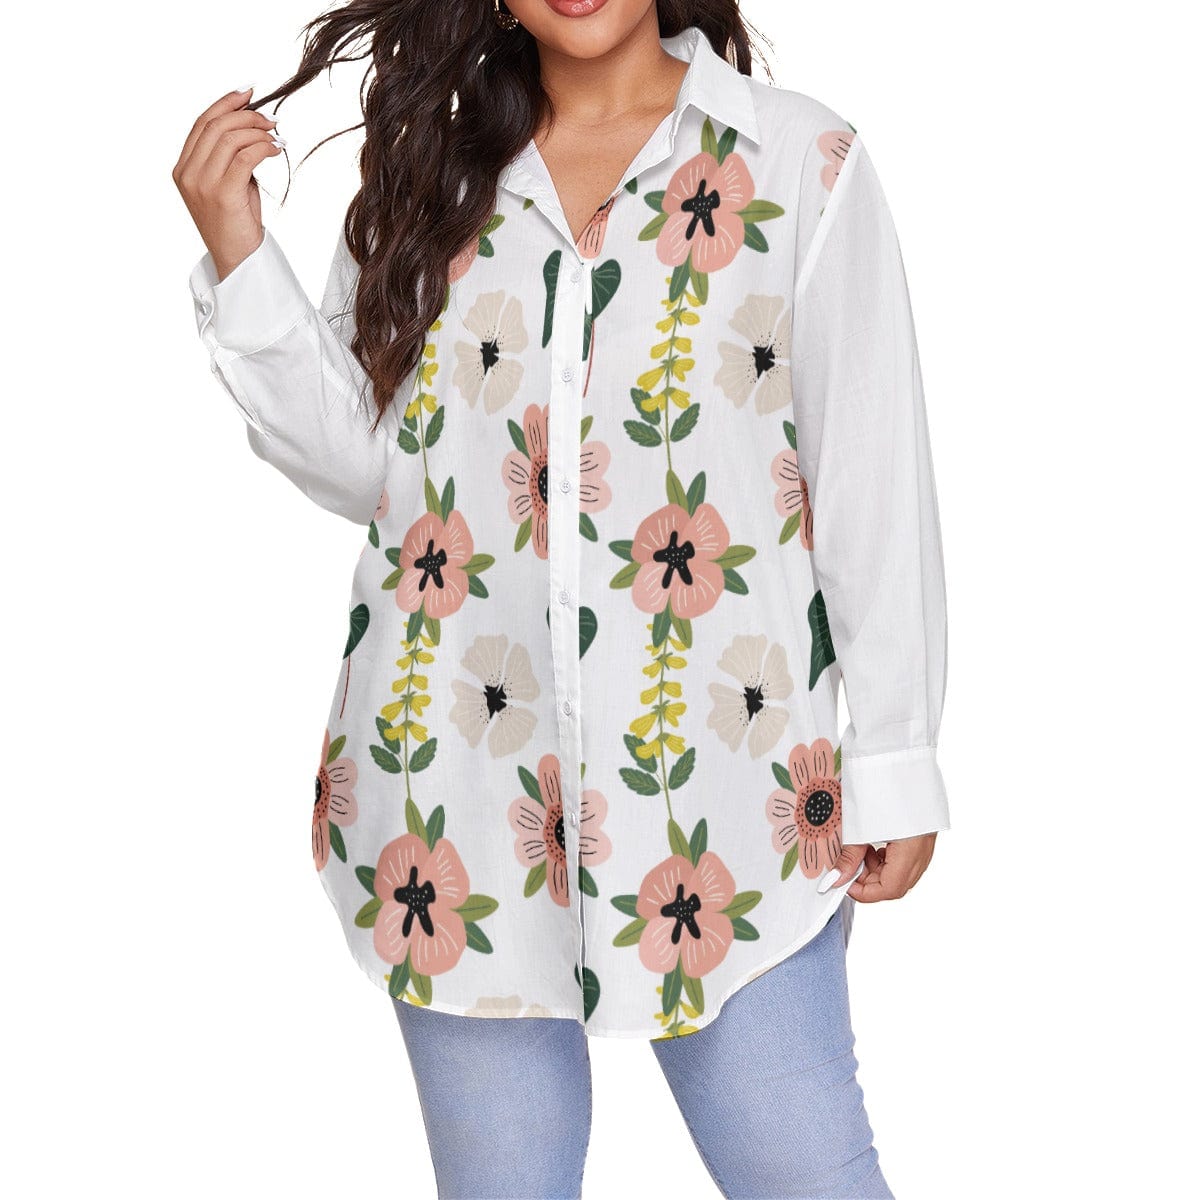 Yoycol 2XL / White Coral Floral - Women's Shirt With Long Sleeve(Plus Size)